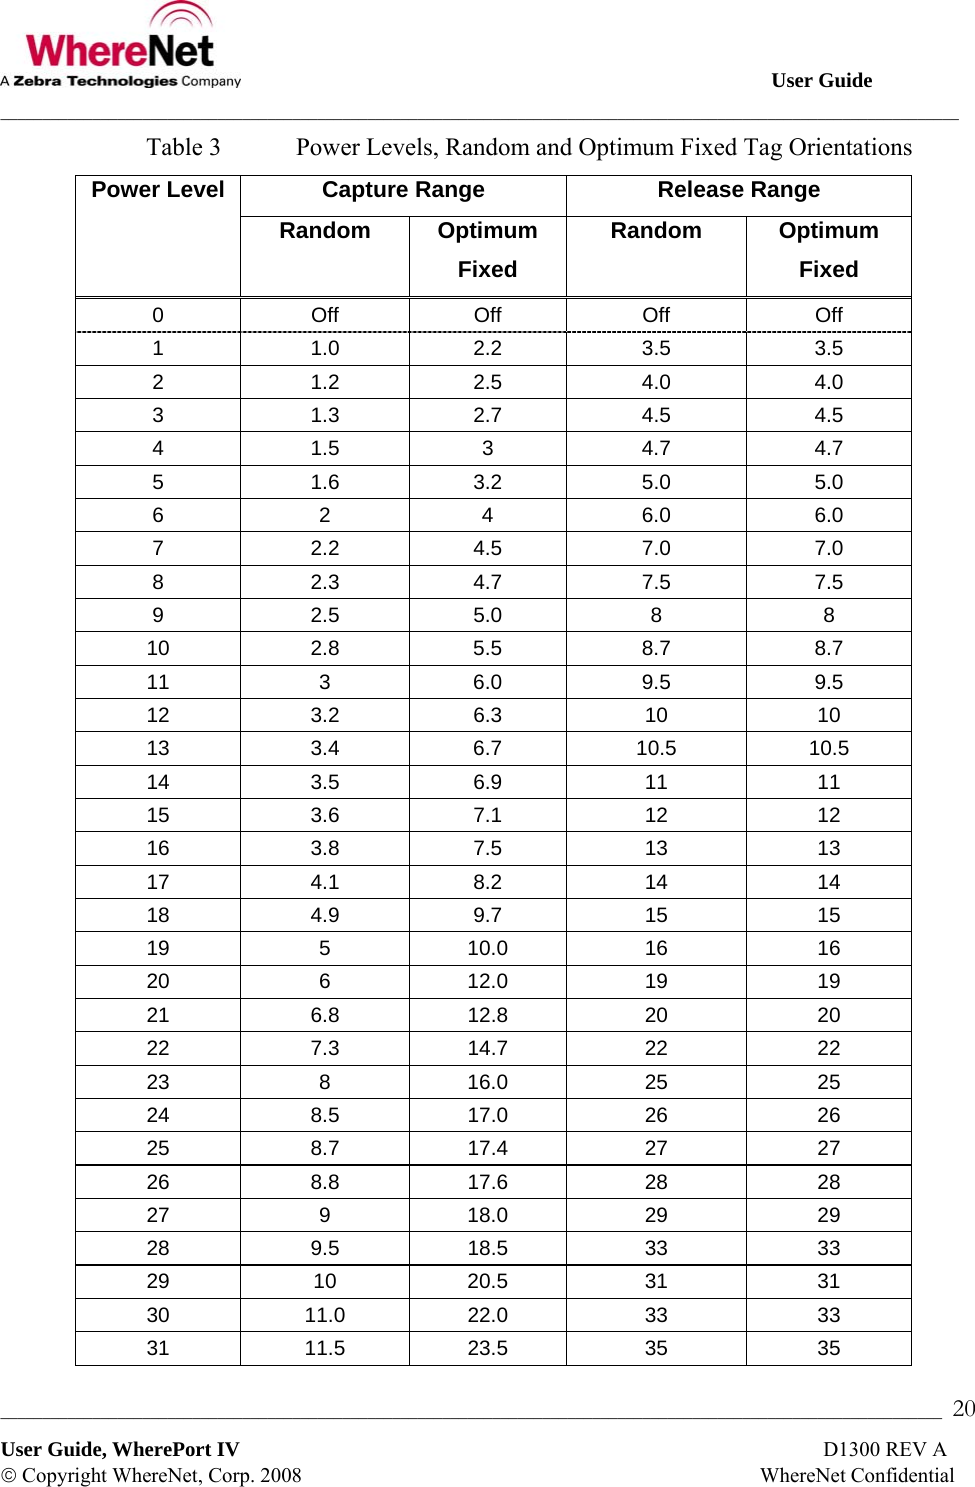                                                                                                       User Guide ___________________________________________________________________________________________________________________ _________________________________________________________________________________________________________________  20 User Guide, WherePort IV                                                                                                                D1300 REV A © Copyright WhereNet, Corp. 2008                                                                                        WhereNet Confidential Table 3  Power Levels, Random and Optimum Fixed Tag Orientations Capture Range  Release Range Power Level Random Optimum Fixed Random Optimum Fixed 0 Off Off Off Off 1 1.0 2.2 3.5 3.5 2 1.2 2.5 4.0 4.0 3 1.3 2.7 4.5 4.5 4 1.5 3 4.7 4.7 5 1.6 3.2 5.0 5.0 6 2 4 6.0 6.0 7 2.2 4.5 7.0 7.0 8 2.3 4.7 7.5 7.5 9 2.5 5.0 8  8 10 2.8 5.5 8.7 8.7 11 3 6.0 9.5 9.5 12 3.2 6.3 10  10 13 3.4 6.7 10.5 10.5 14 3.5 6.9 11  11 15 3.6 7.1 12  12 16 3.8 7.5 13  13 17 4.1 8.2 14  14 18 4.9 9.7 15  15 19  5 10.0 16  16 20  6 12.0 19  19 21 6.8 12.8 20  20 22 7.3 14.7 22  22 23  8 16.0 25  25 24 8.5 17.0 26  26 25 8.7 17.4 27  27 26 8.8 17.6 28  28 27  9 18.0 29  29 28 9.5 18.5 33  33 29 10 20.5 31  31 30 11.0 22.0 33  33 31 11.5 23.5 35  35  